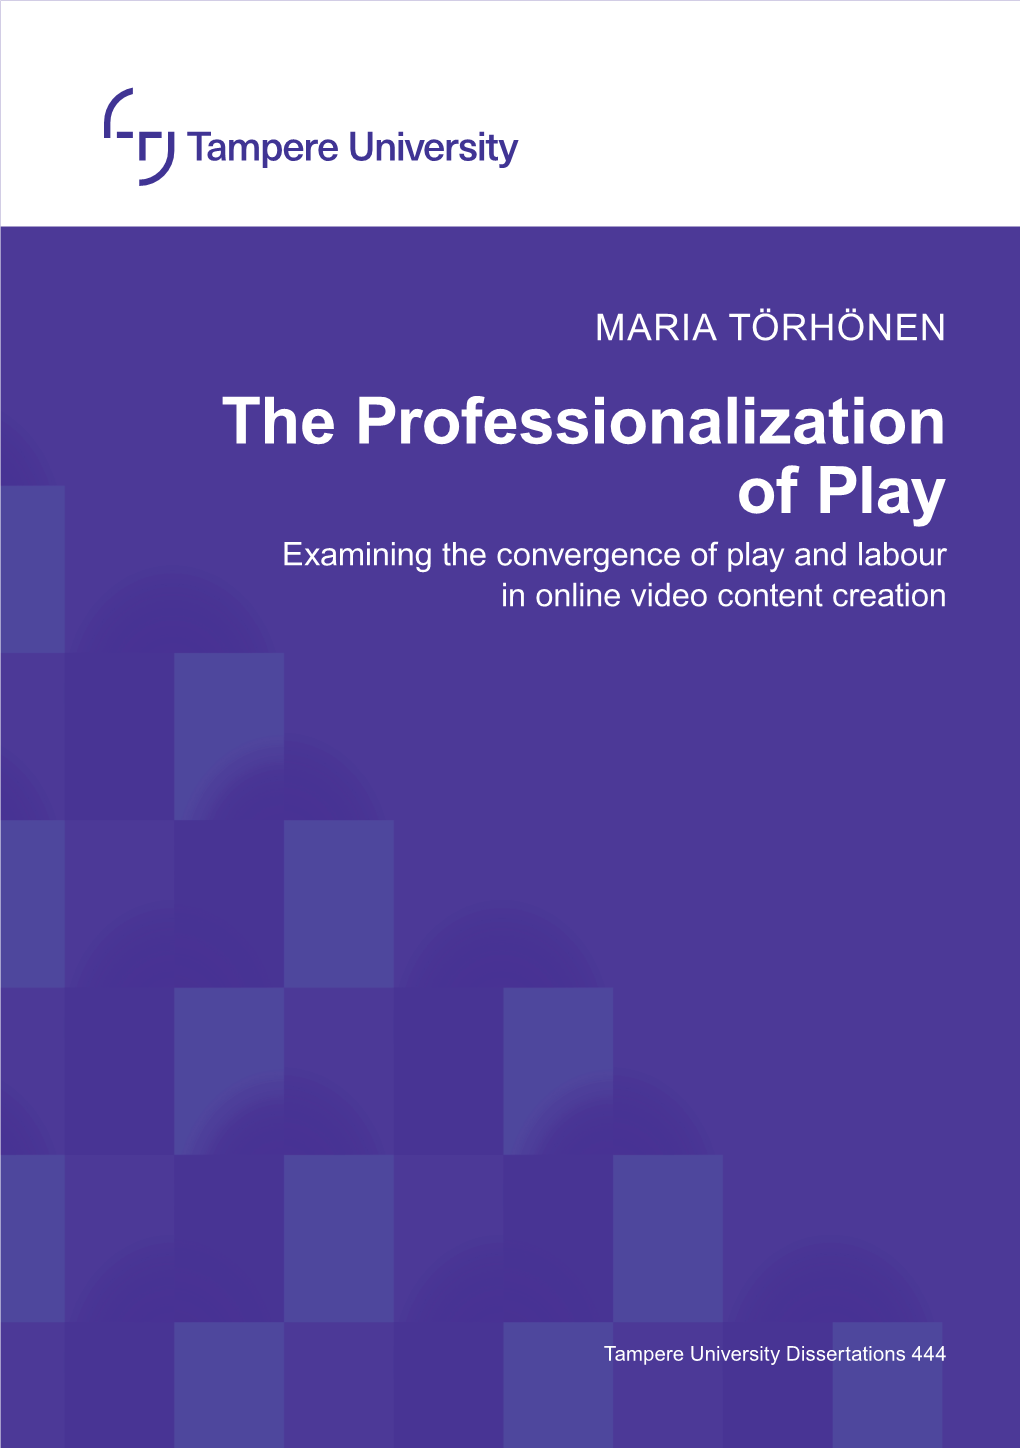 The Professionalization of Play Examining the Convergence of Play and Labour in Online Video Content Creation